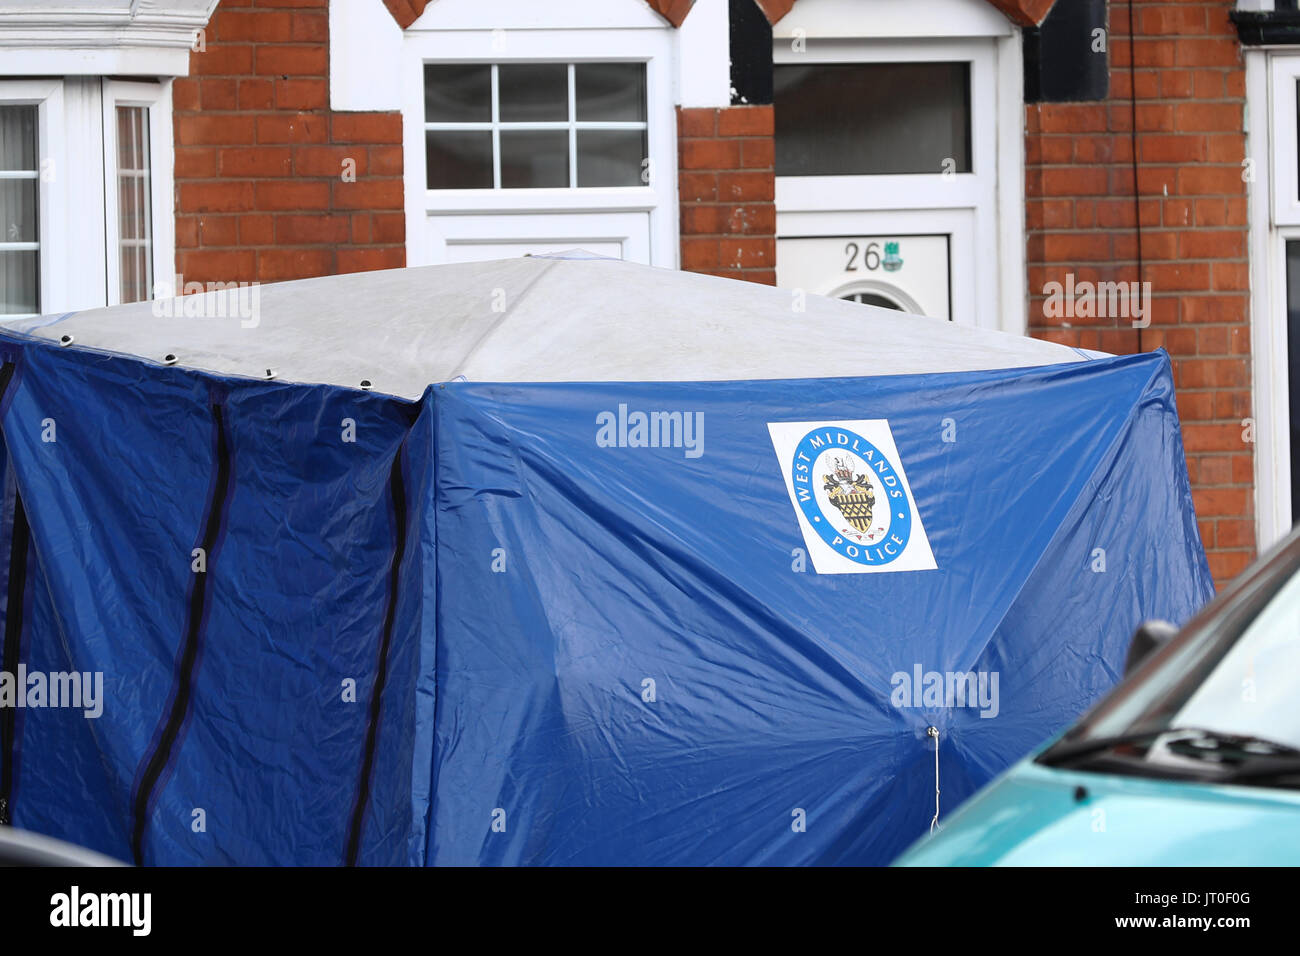 Forensics on Tenby Road in Moseley, Birmingham, where a 40-year-old man has been stabbed to death in what police are calling a 'brutal attack'. Stock Photo